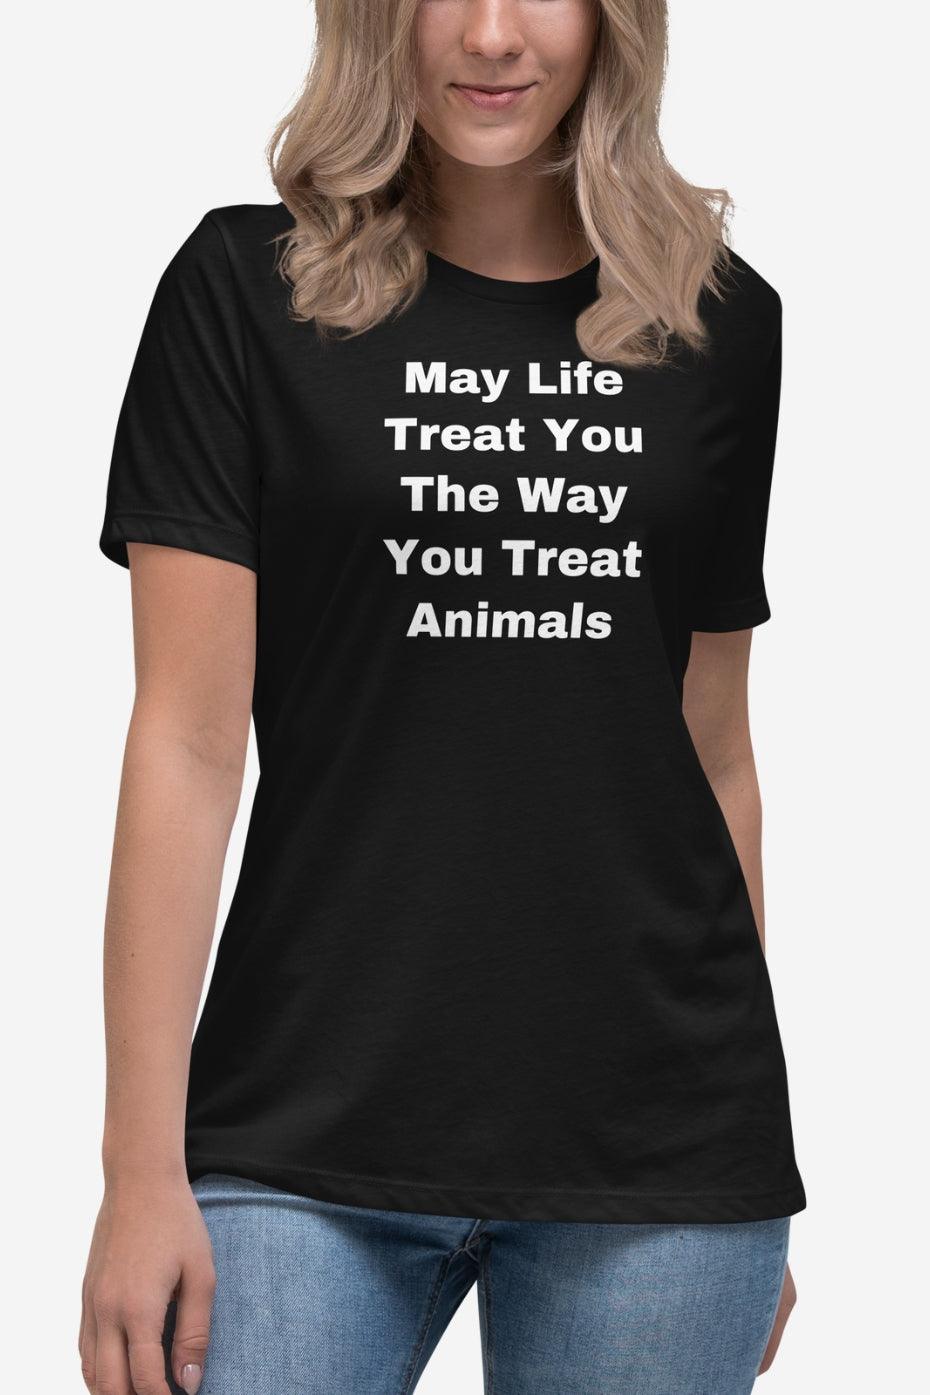 The Way You Treat Animals Women's Relaxed T-Shirt